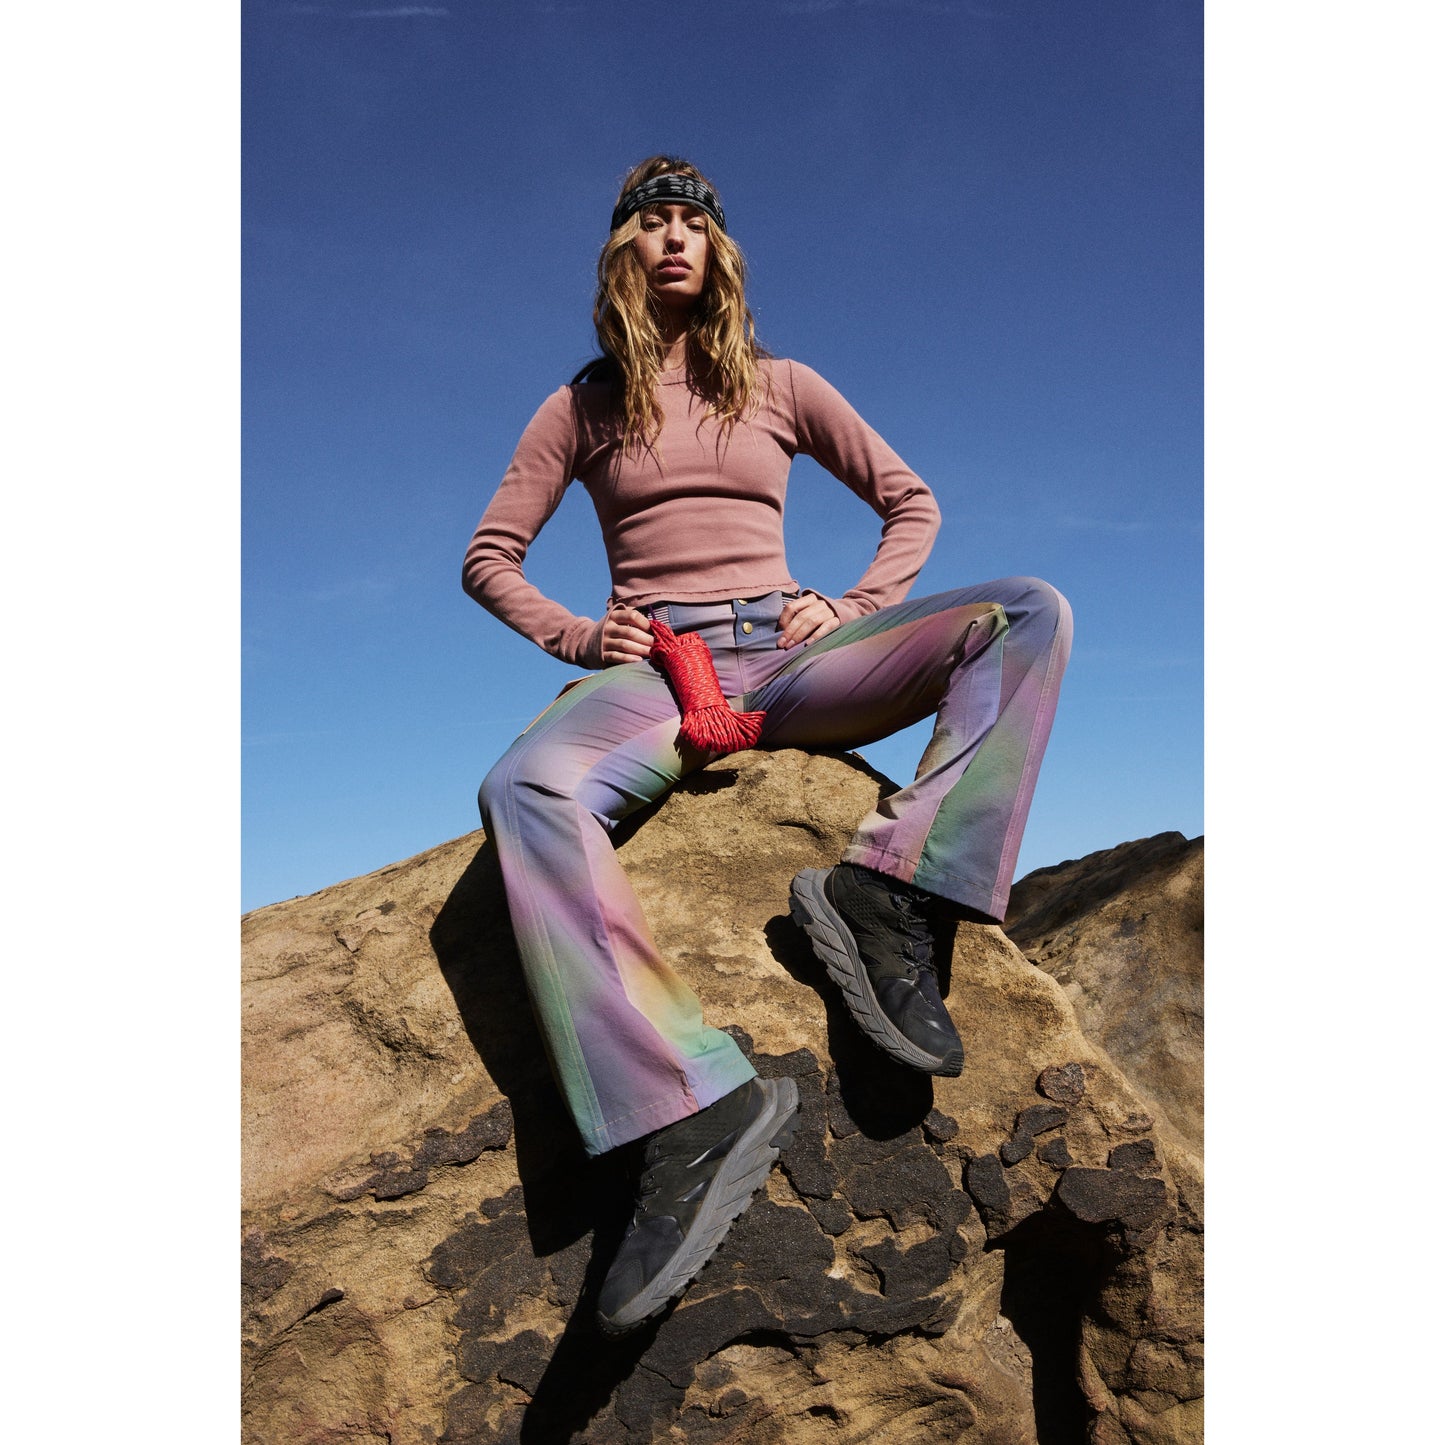 Woman in Free People Movement's Printed Cascade Flare pants, in the Galaxy Gradient print, posing on a rock under a clear blue sky.